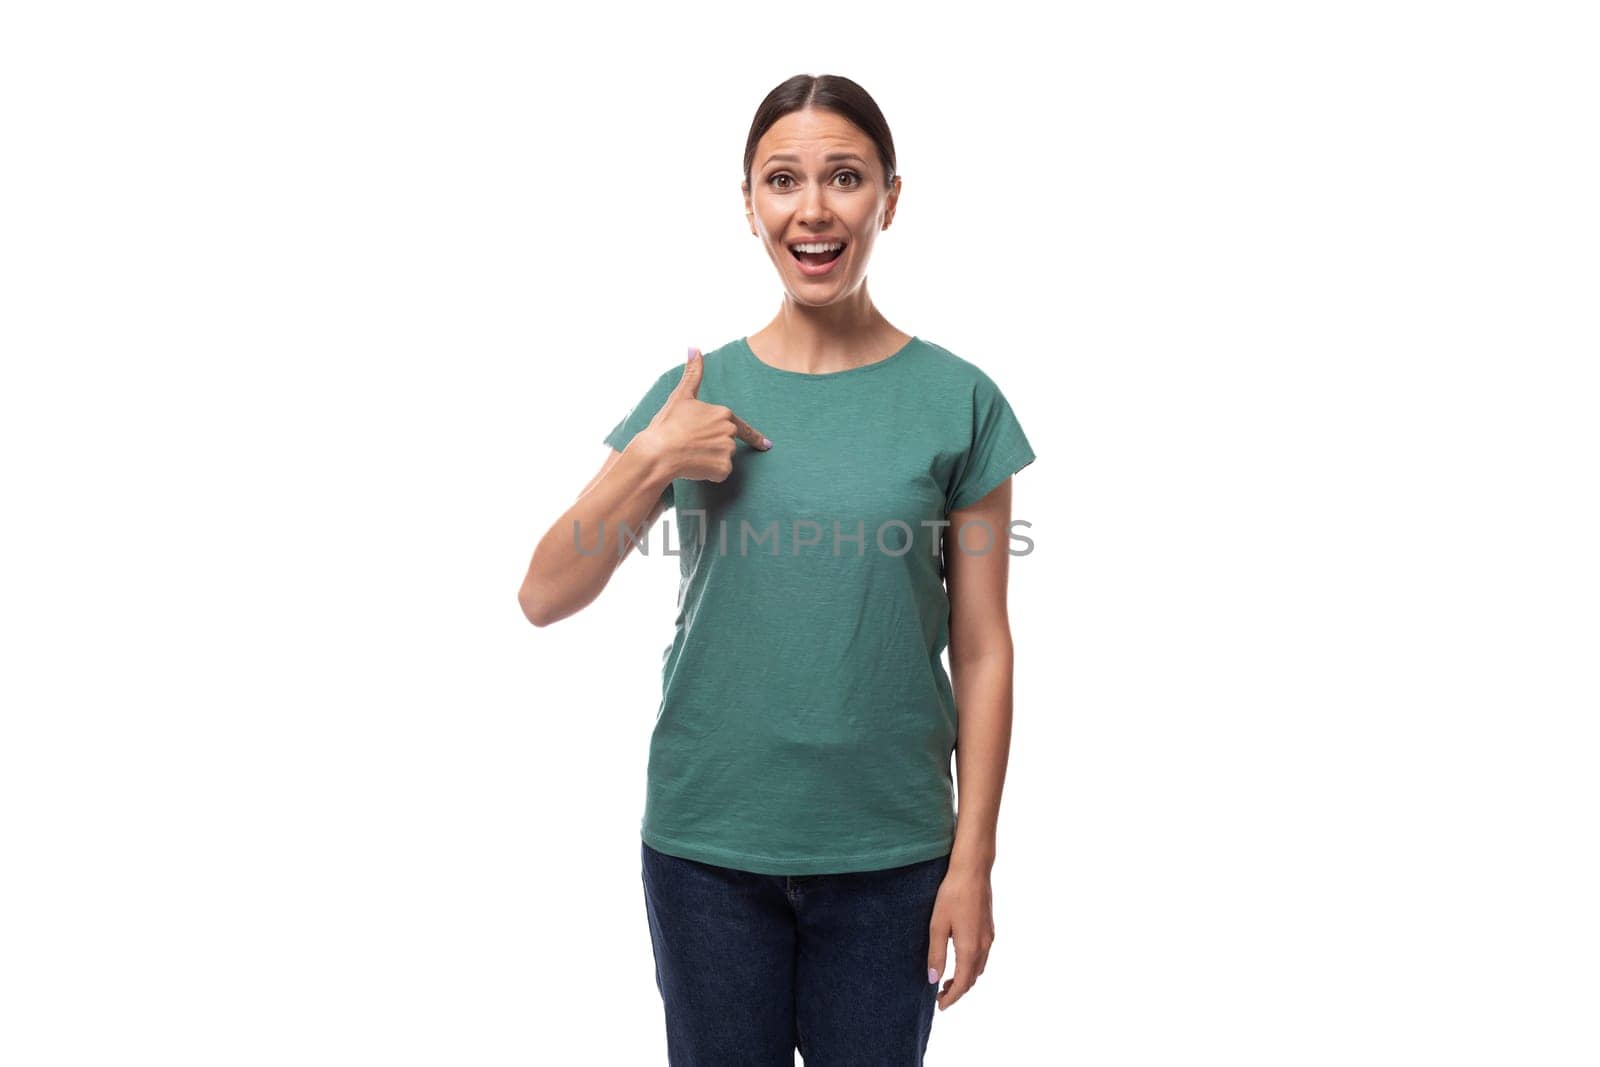 young slender european woman with ponytail hairstyle dressed in green t-shirt draws attention to advertising.